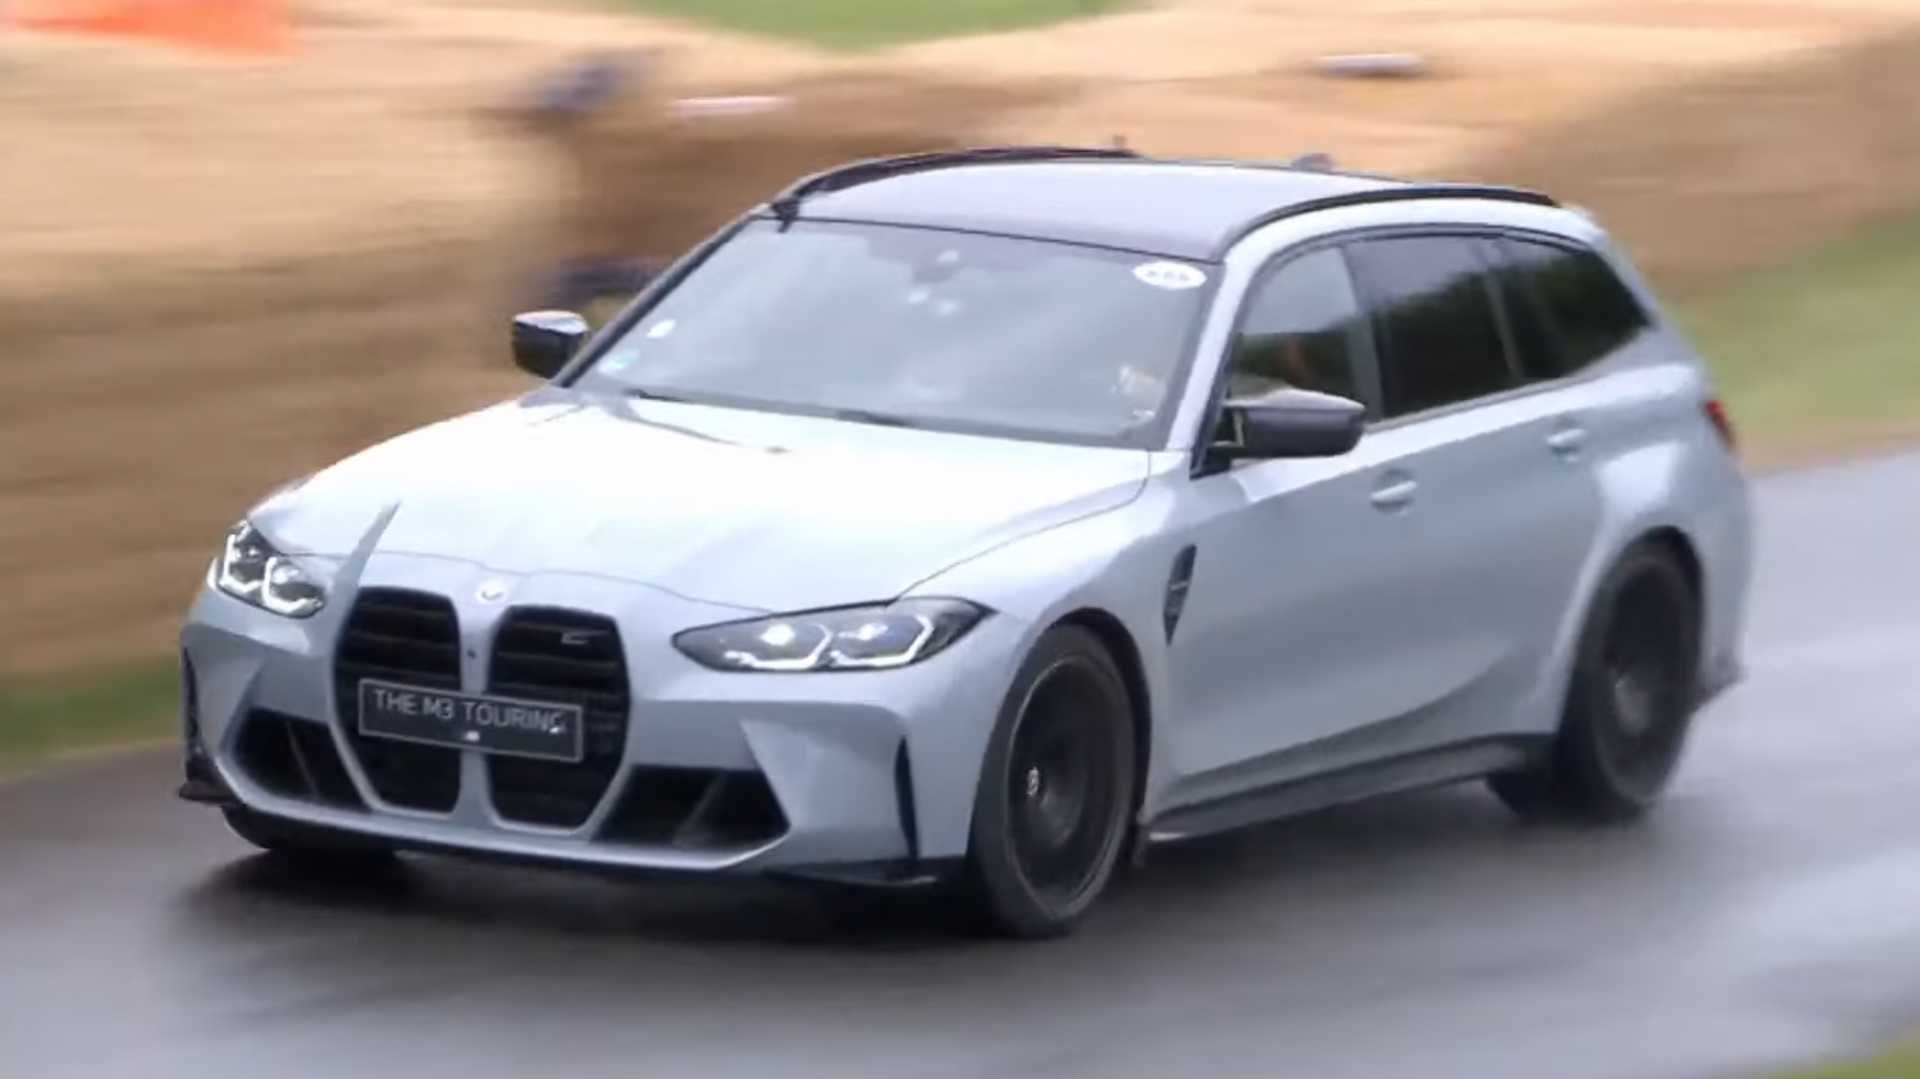 BMW M3 Touring debuts at Goodwood in the rain